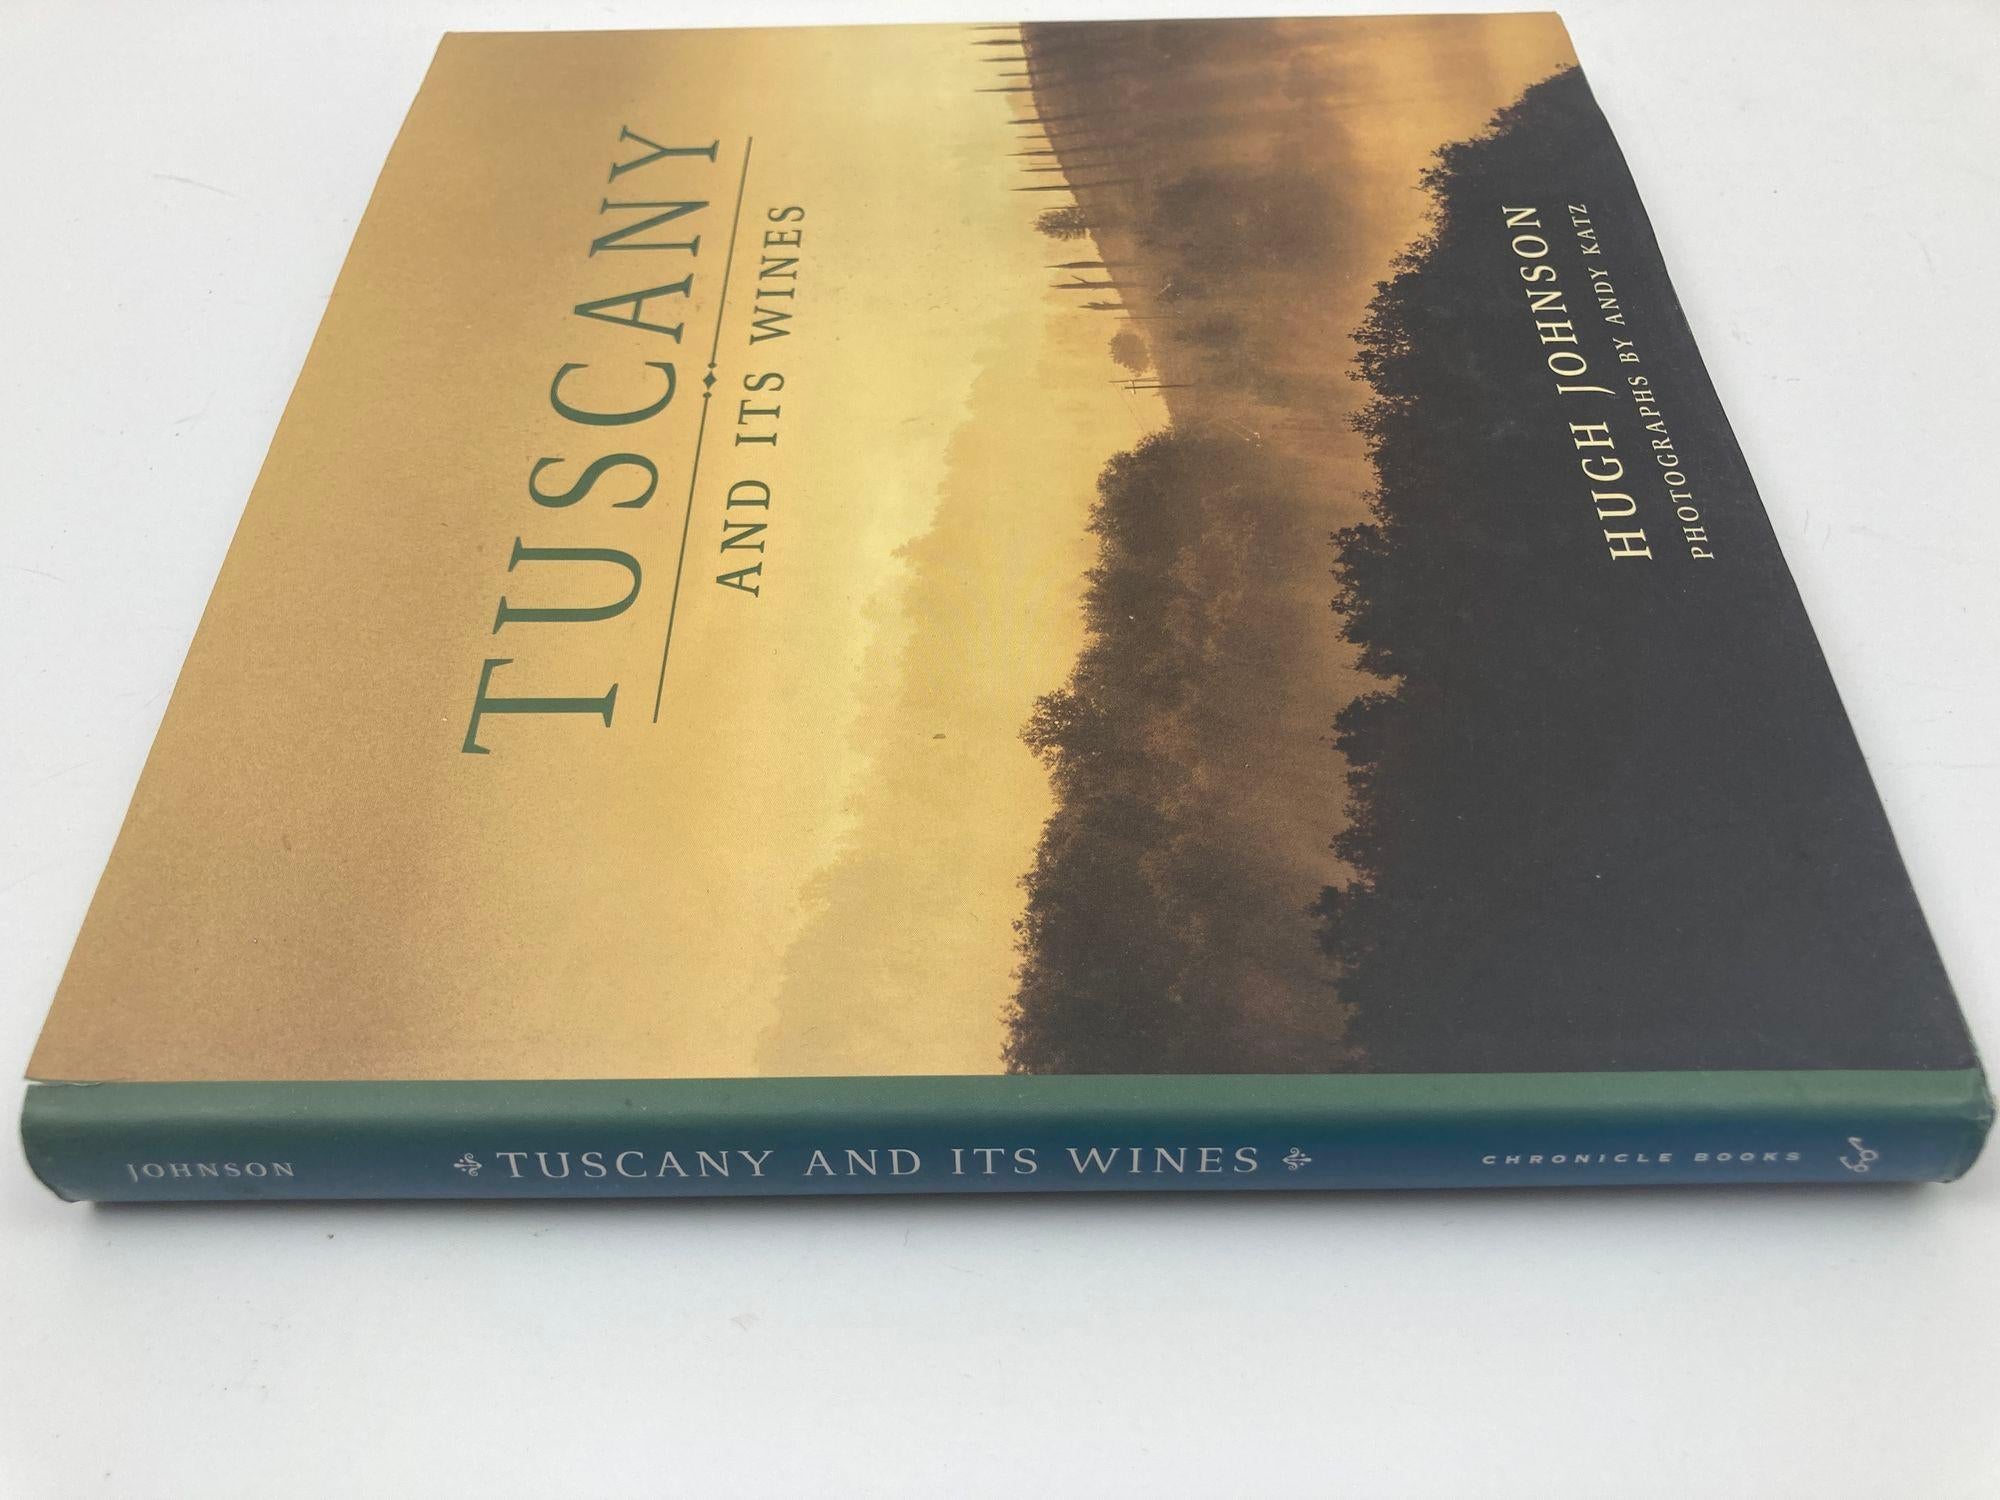 Country Tuscany and Its Wines by Hugh Johnson Livre à couverture rigide 2000 en vente